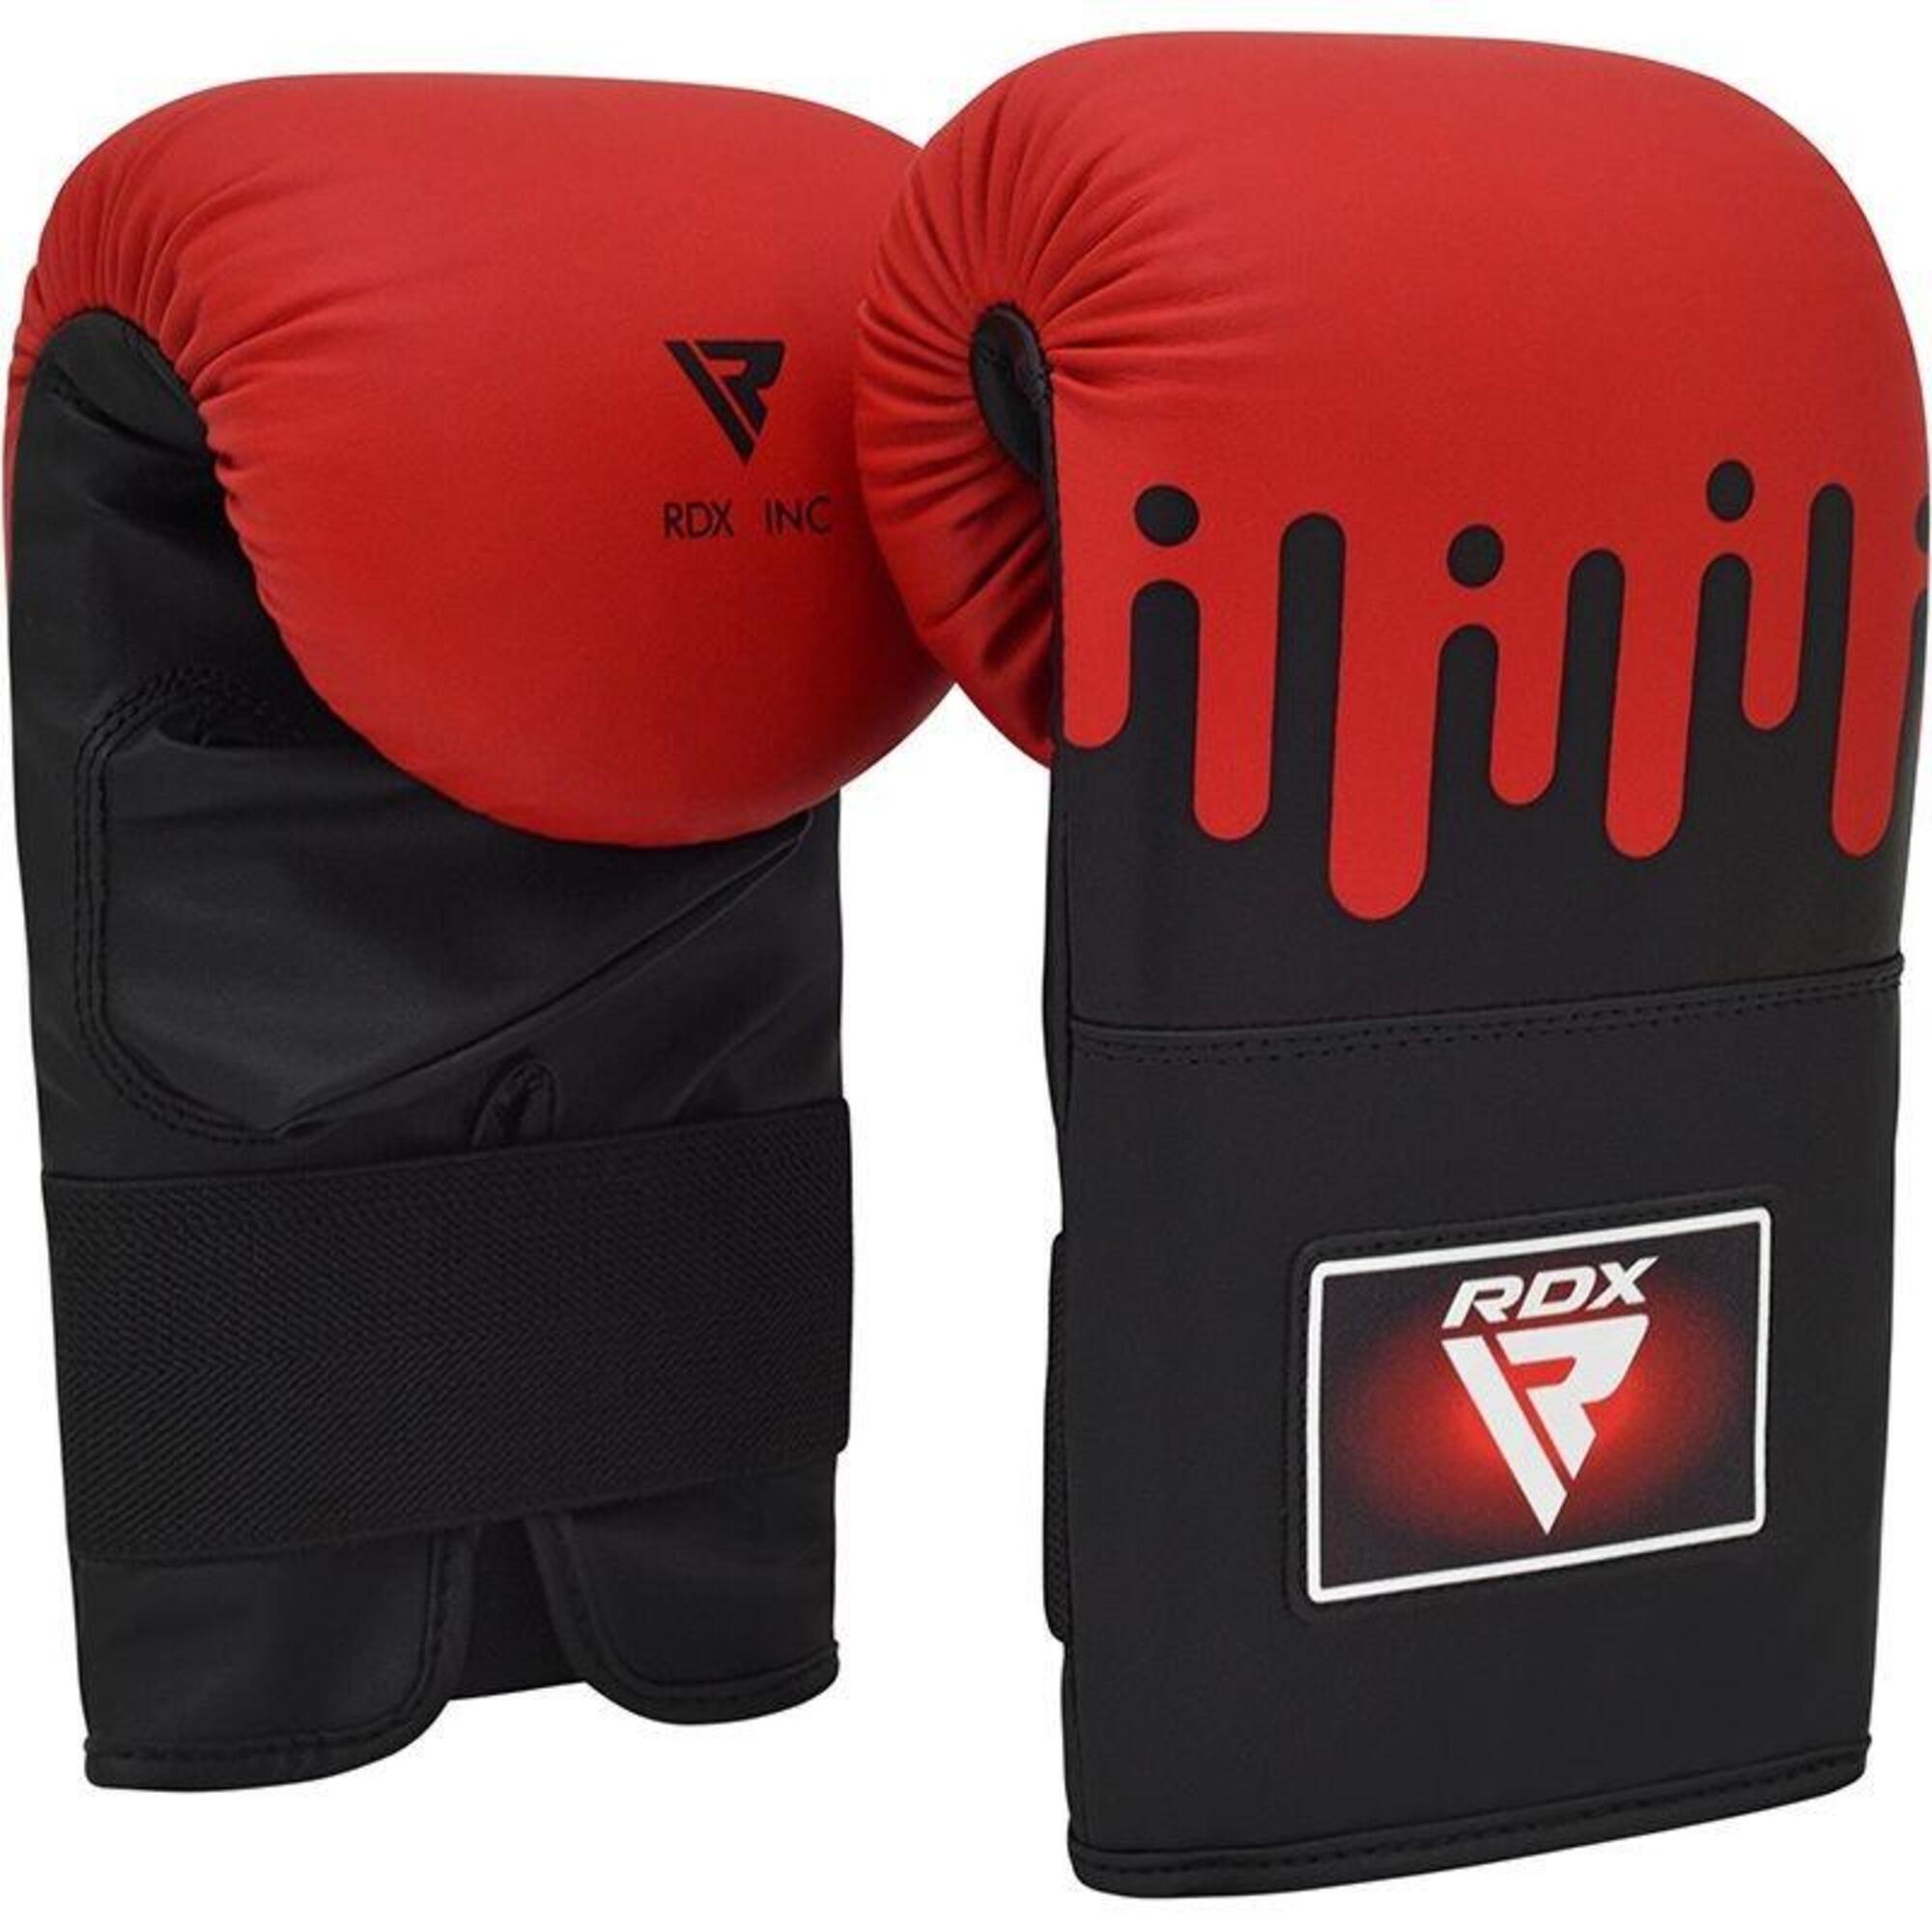 Boxing Bag Mitts F-Series - F9 - noir/rouge